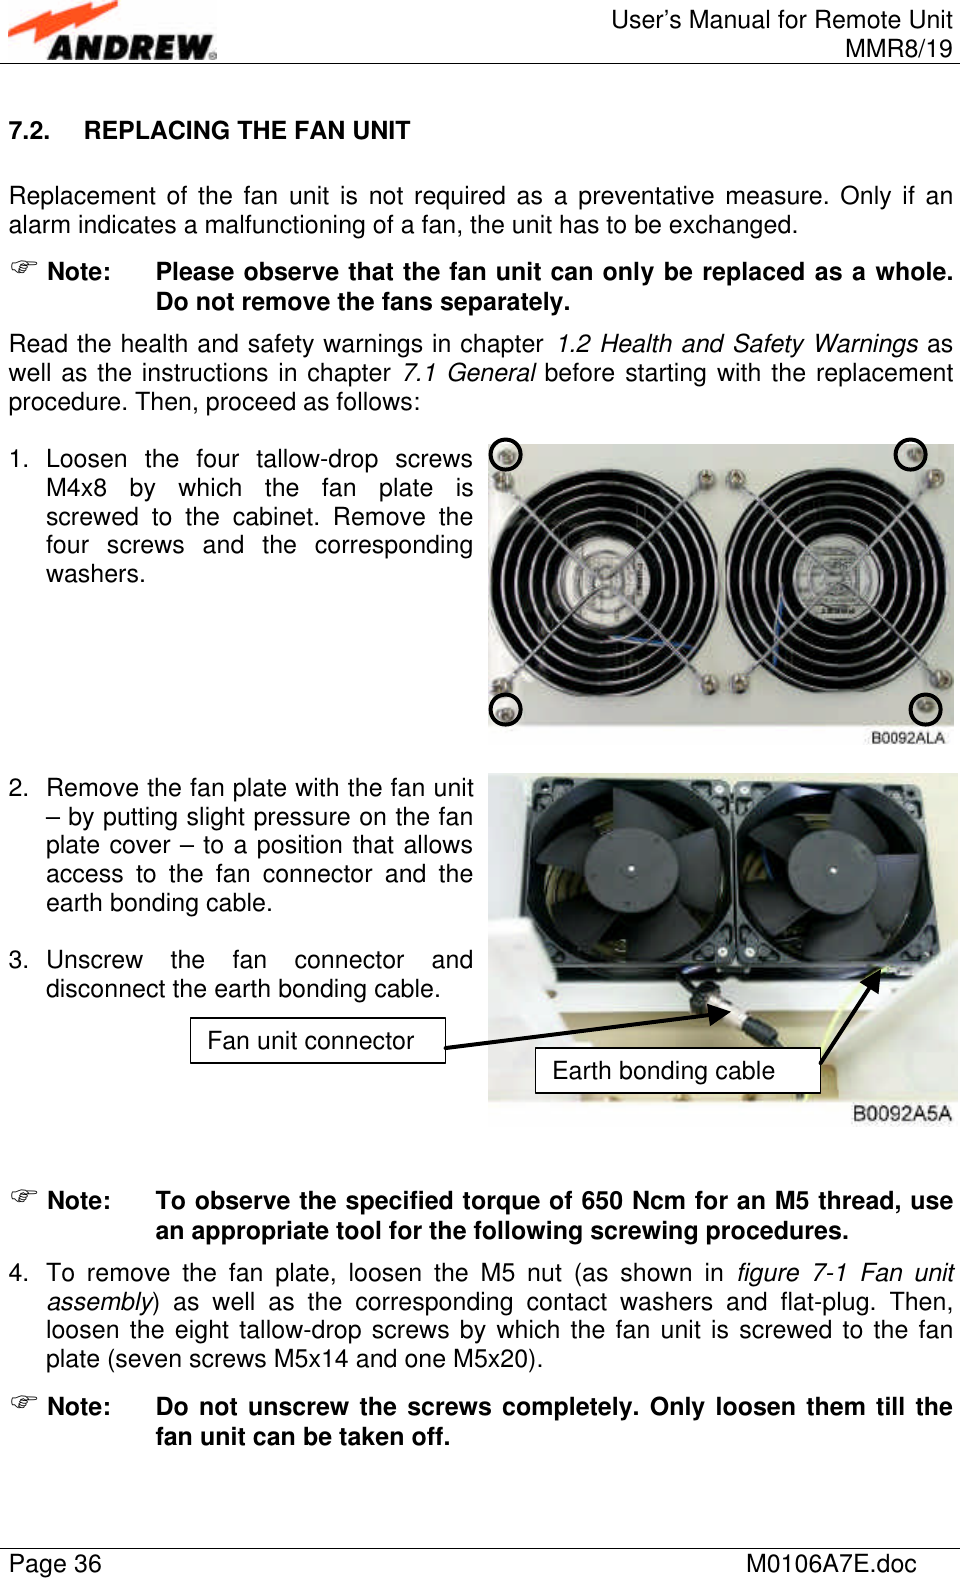 User’s Manual for Remote UnitMMR8/19Page 36 M0106A7E.doc7.2. REPLACING THE FAN UNITReplacement of the fan unit is not required as a preventative measure. Only if analarm indicates a malfunctioning of a fan, the unit has to be exchanged.F Note: Please observe that the fan unit can only be replaced as a whole.Do not remove the fans separately.Read the health and safety warnings in chapter 1.2 Health and Safety Warnings aswell as the instructions in chapter 7.1 General before starting with the replacementprocedure. Then, proceed as follows:1. Loosen the four tallow-drop screwsM4x8 by which the fan plate isscrewed to the cabinet. Remove thefour screws and the correspondingwashers.2. Remove the fan plate with the fan unit– by putting slight pressure on the fanplate cover – to a position that allowsaccess to the fan connector and theearth bonding cable.3. Unscrew the fan connector anddisconnect the earth bonding cable.F Note: To observe the specified torque of 650 Ncm for an M5 thread, usean appropriate tool for the following screwing procedures.4. To remove the fan plate, loosen the M5 nut (as shown in figure  7-1 Fan unitassembly) as well as the corresponding contact washers and flat-plug. Then,loosen the eight tallow-drop screws by which the fan unit is screwed to the fanplate (seven screws M5x14 and one M5x20).F Note: Do not unscrew the screws completely. Only loosen them till thefan unit can be taken off.Fan unit connectorEarth bonding cable